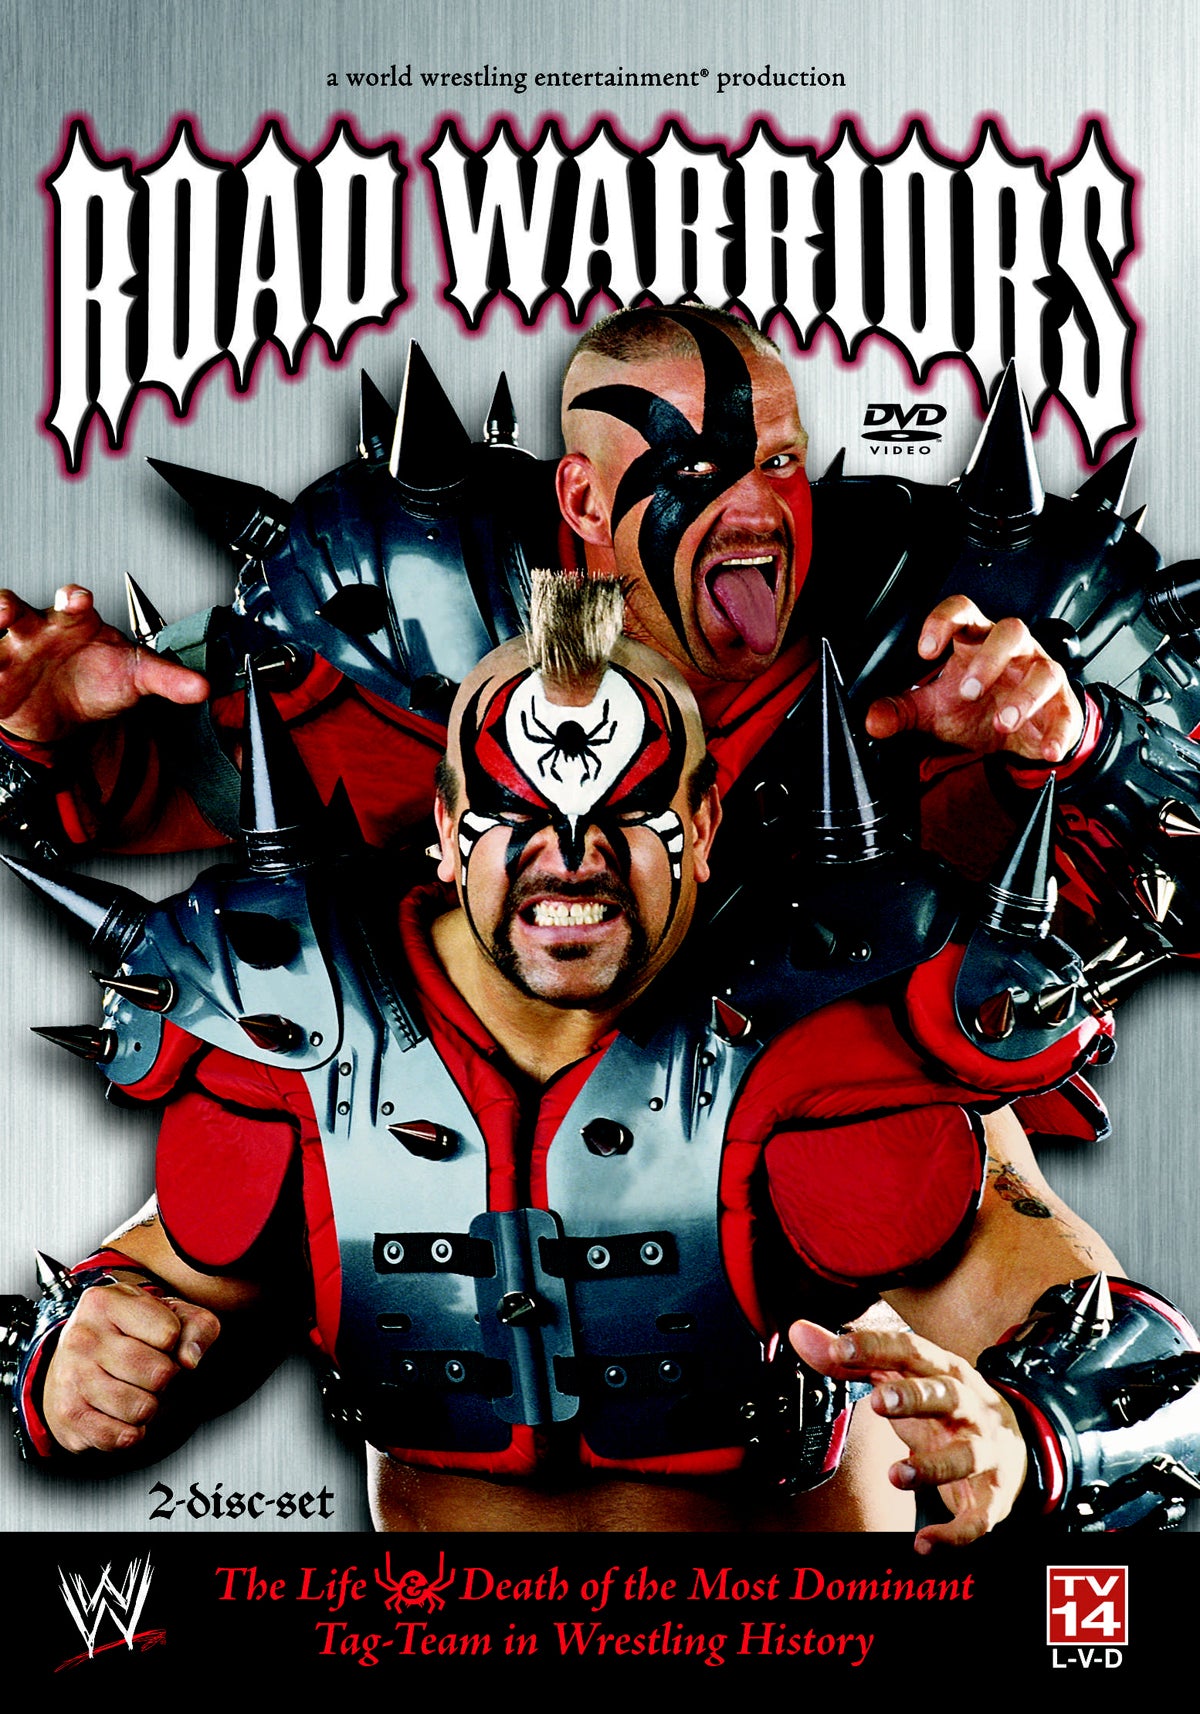 Road Warriors The Life & Death of The Most Dominant Tag Team in Wrestling History